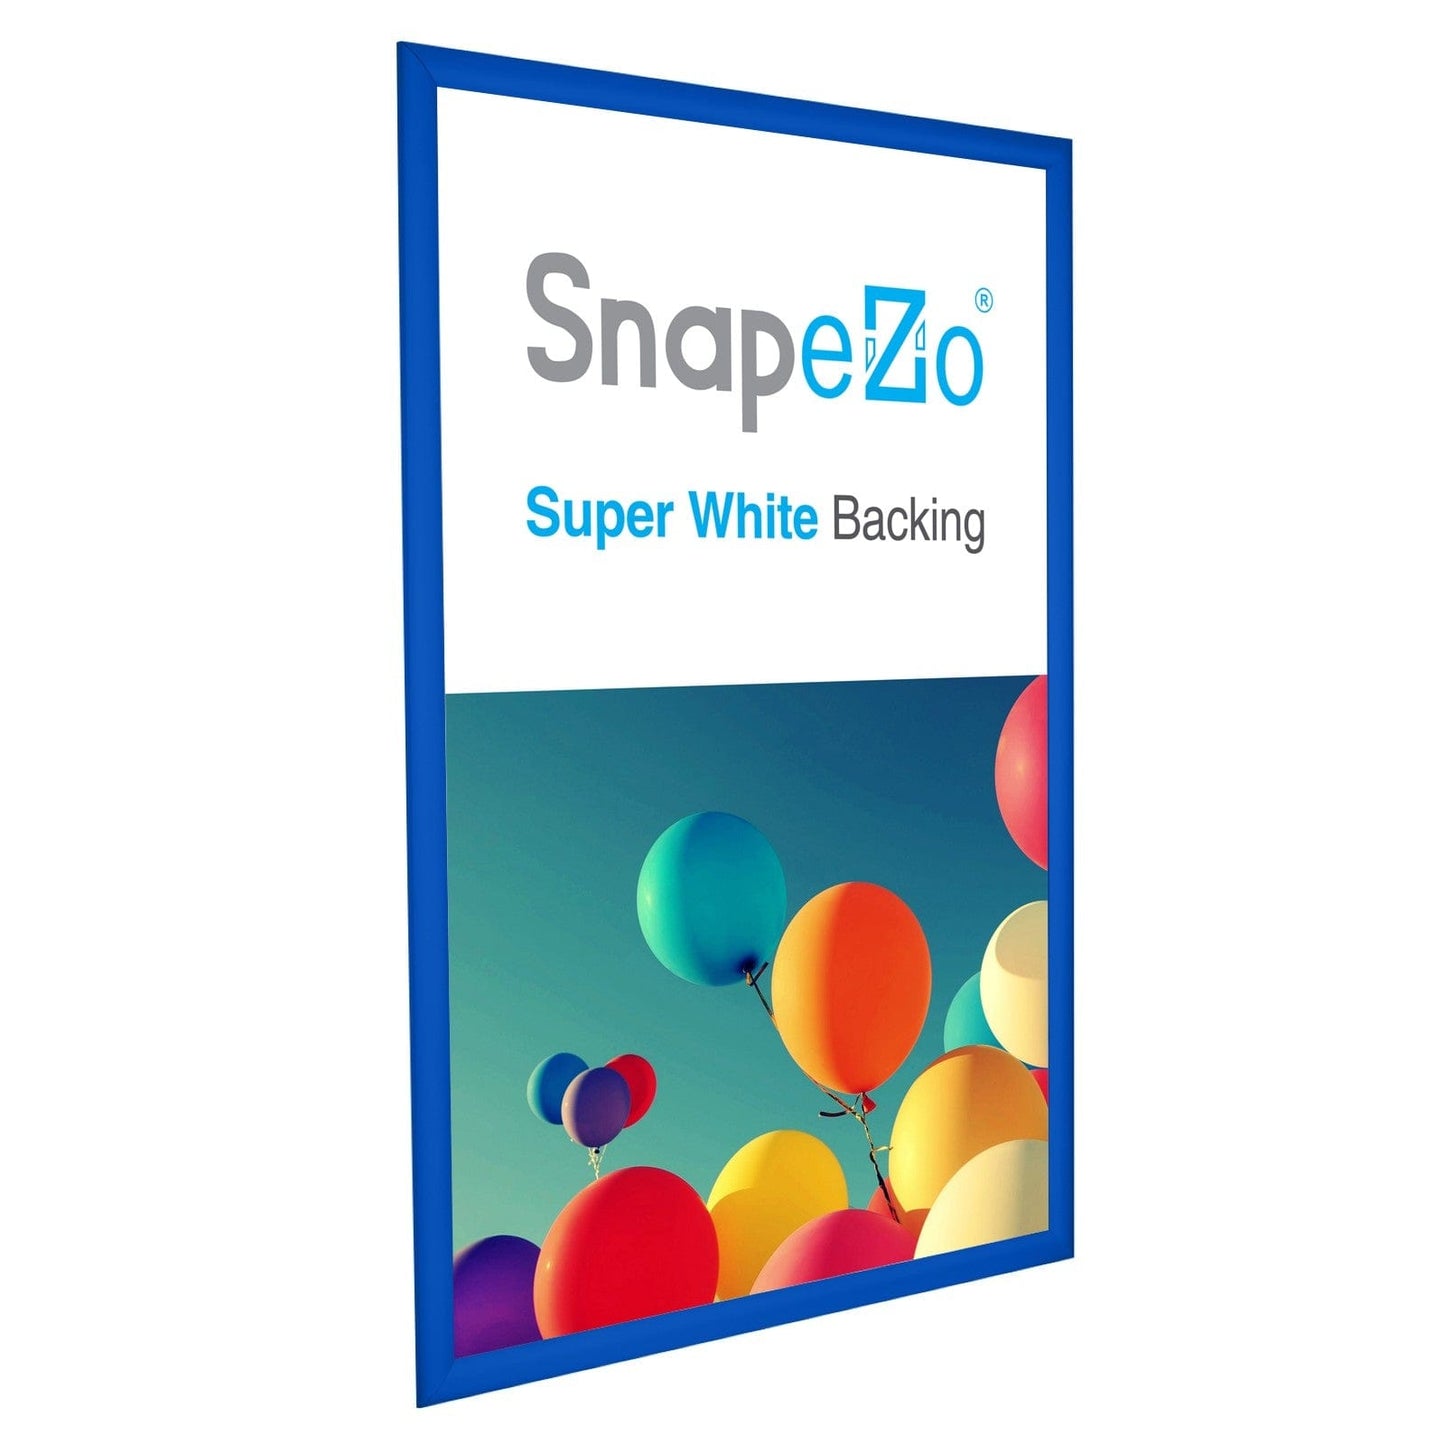 25x38 Blue SnapeZo® Snap Frame - 1.2" Profile - Snap Frames Direct